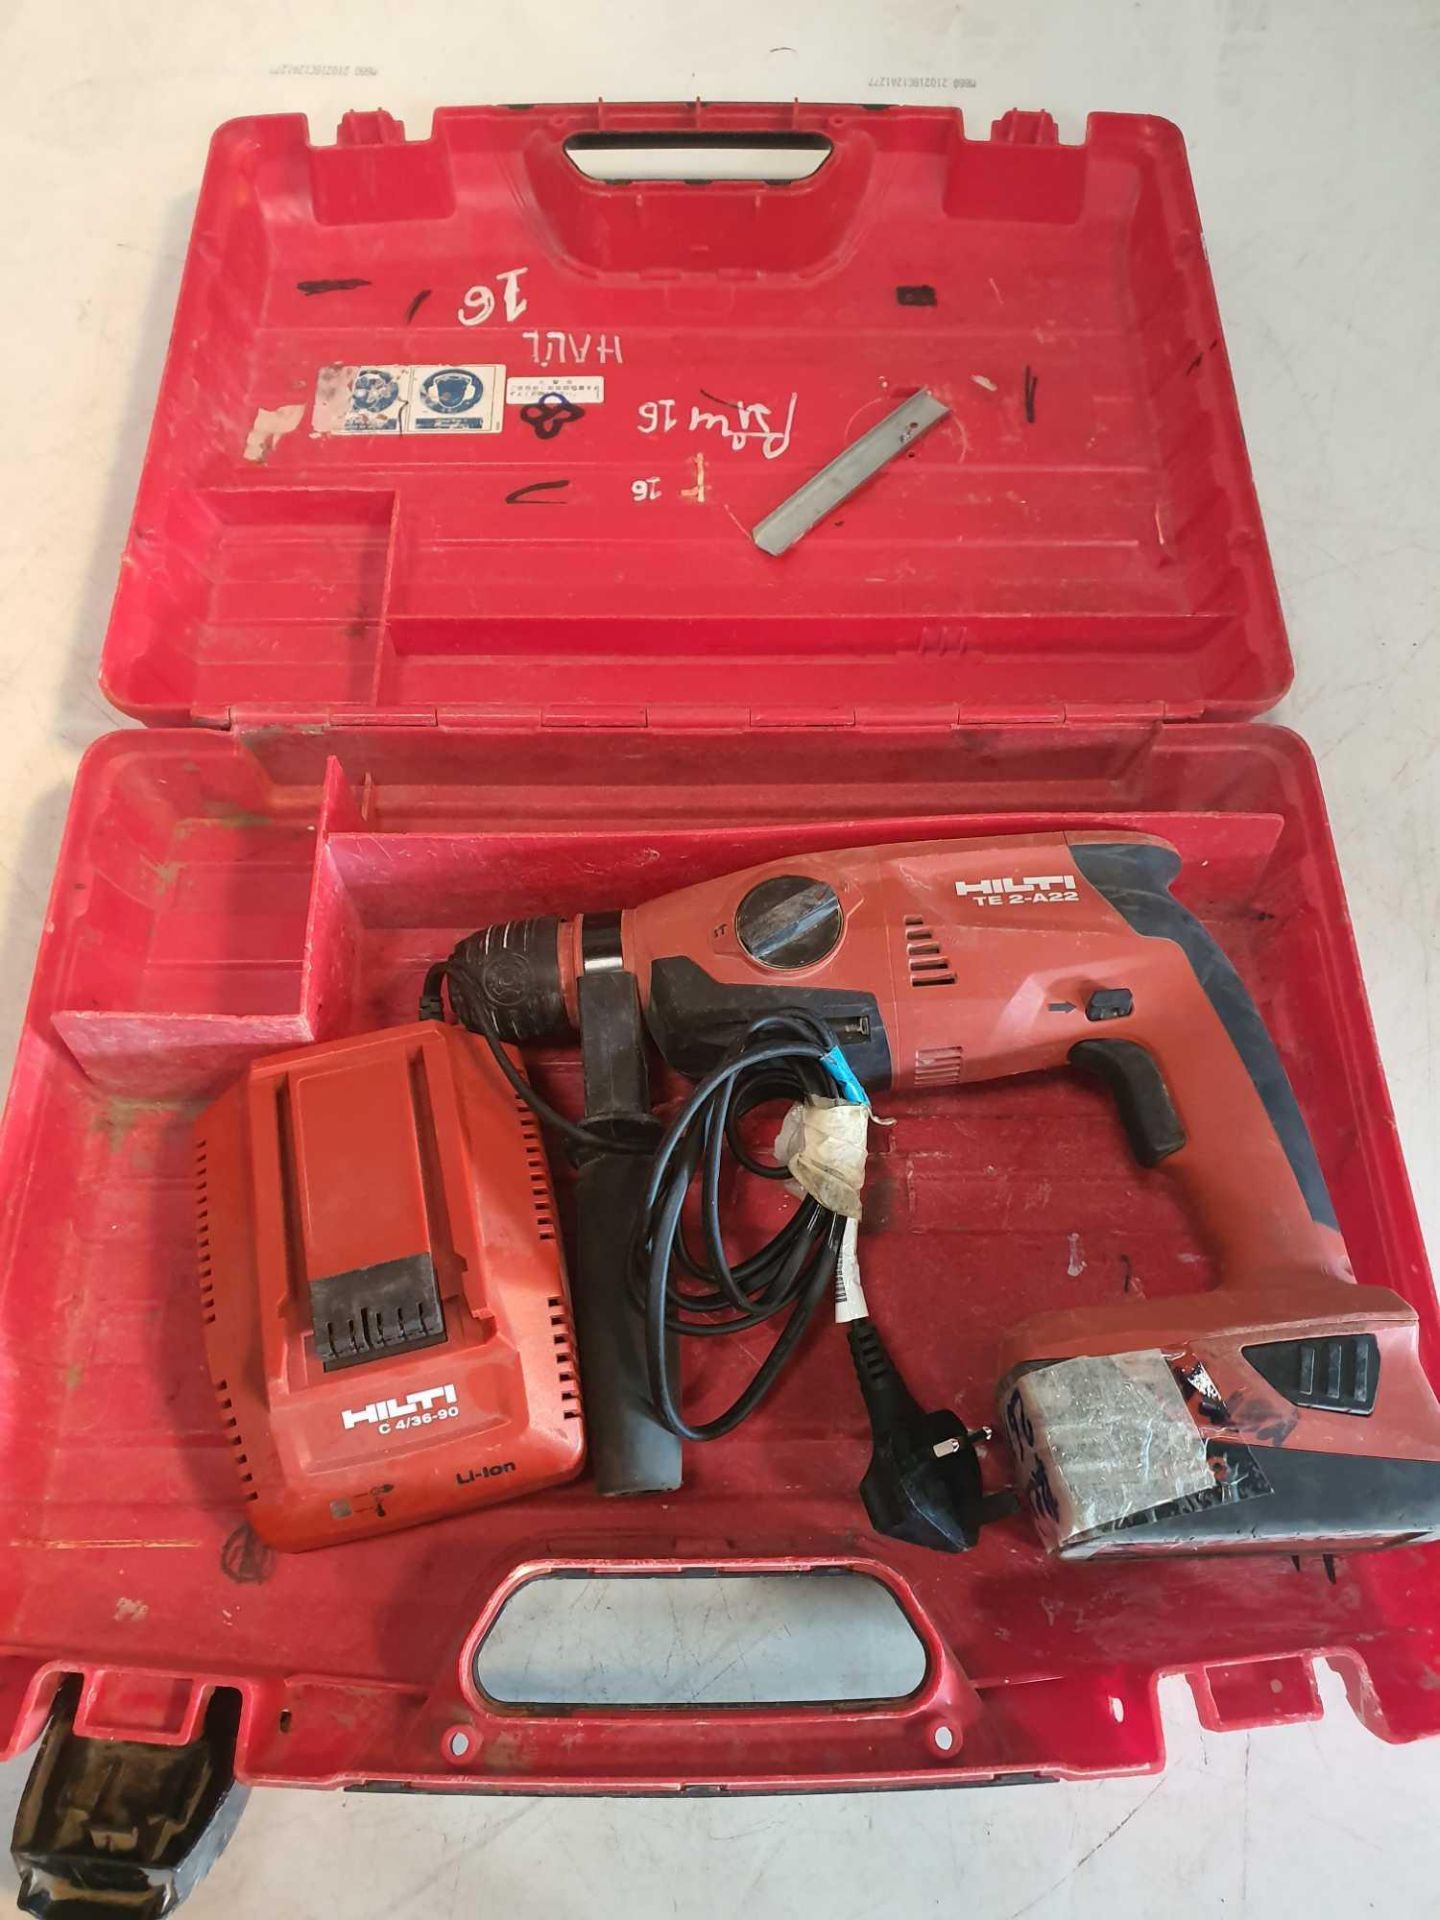 Hilti 18v rotary hammer drill with charger - Image 2 of 3